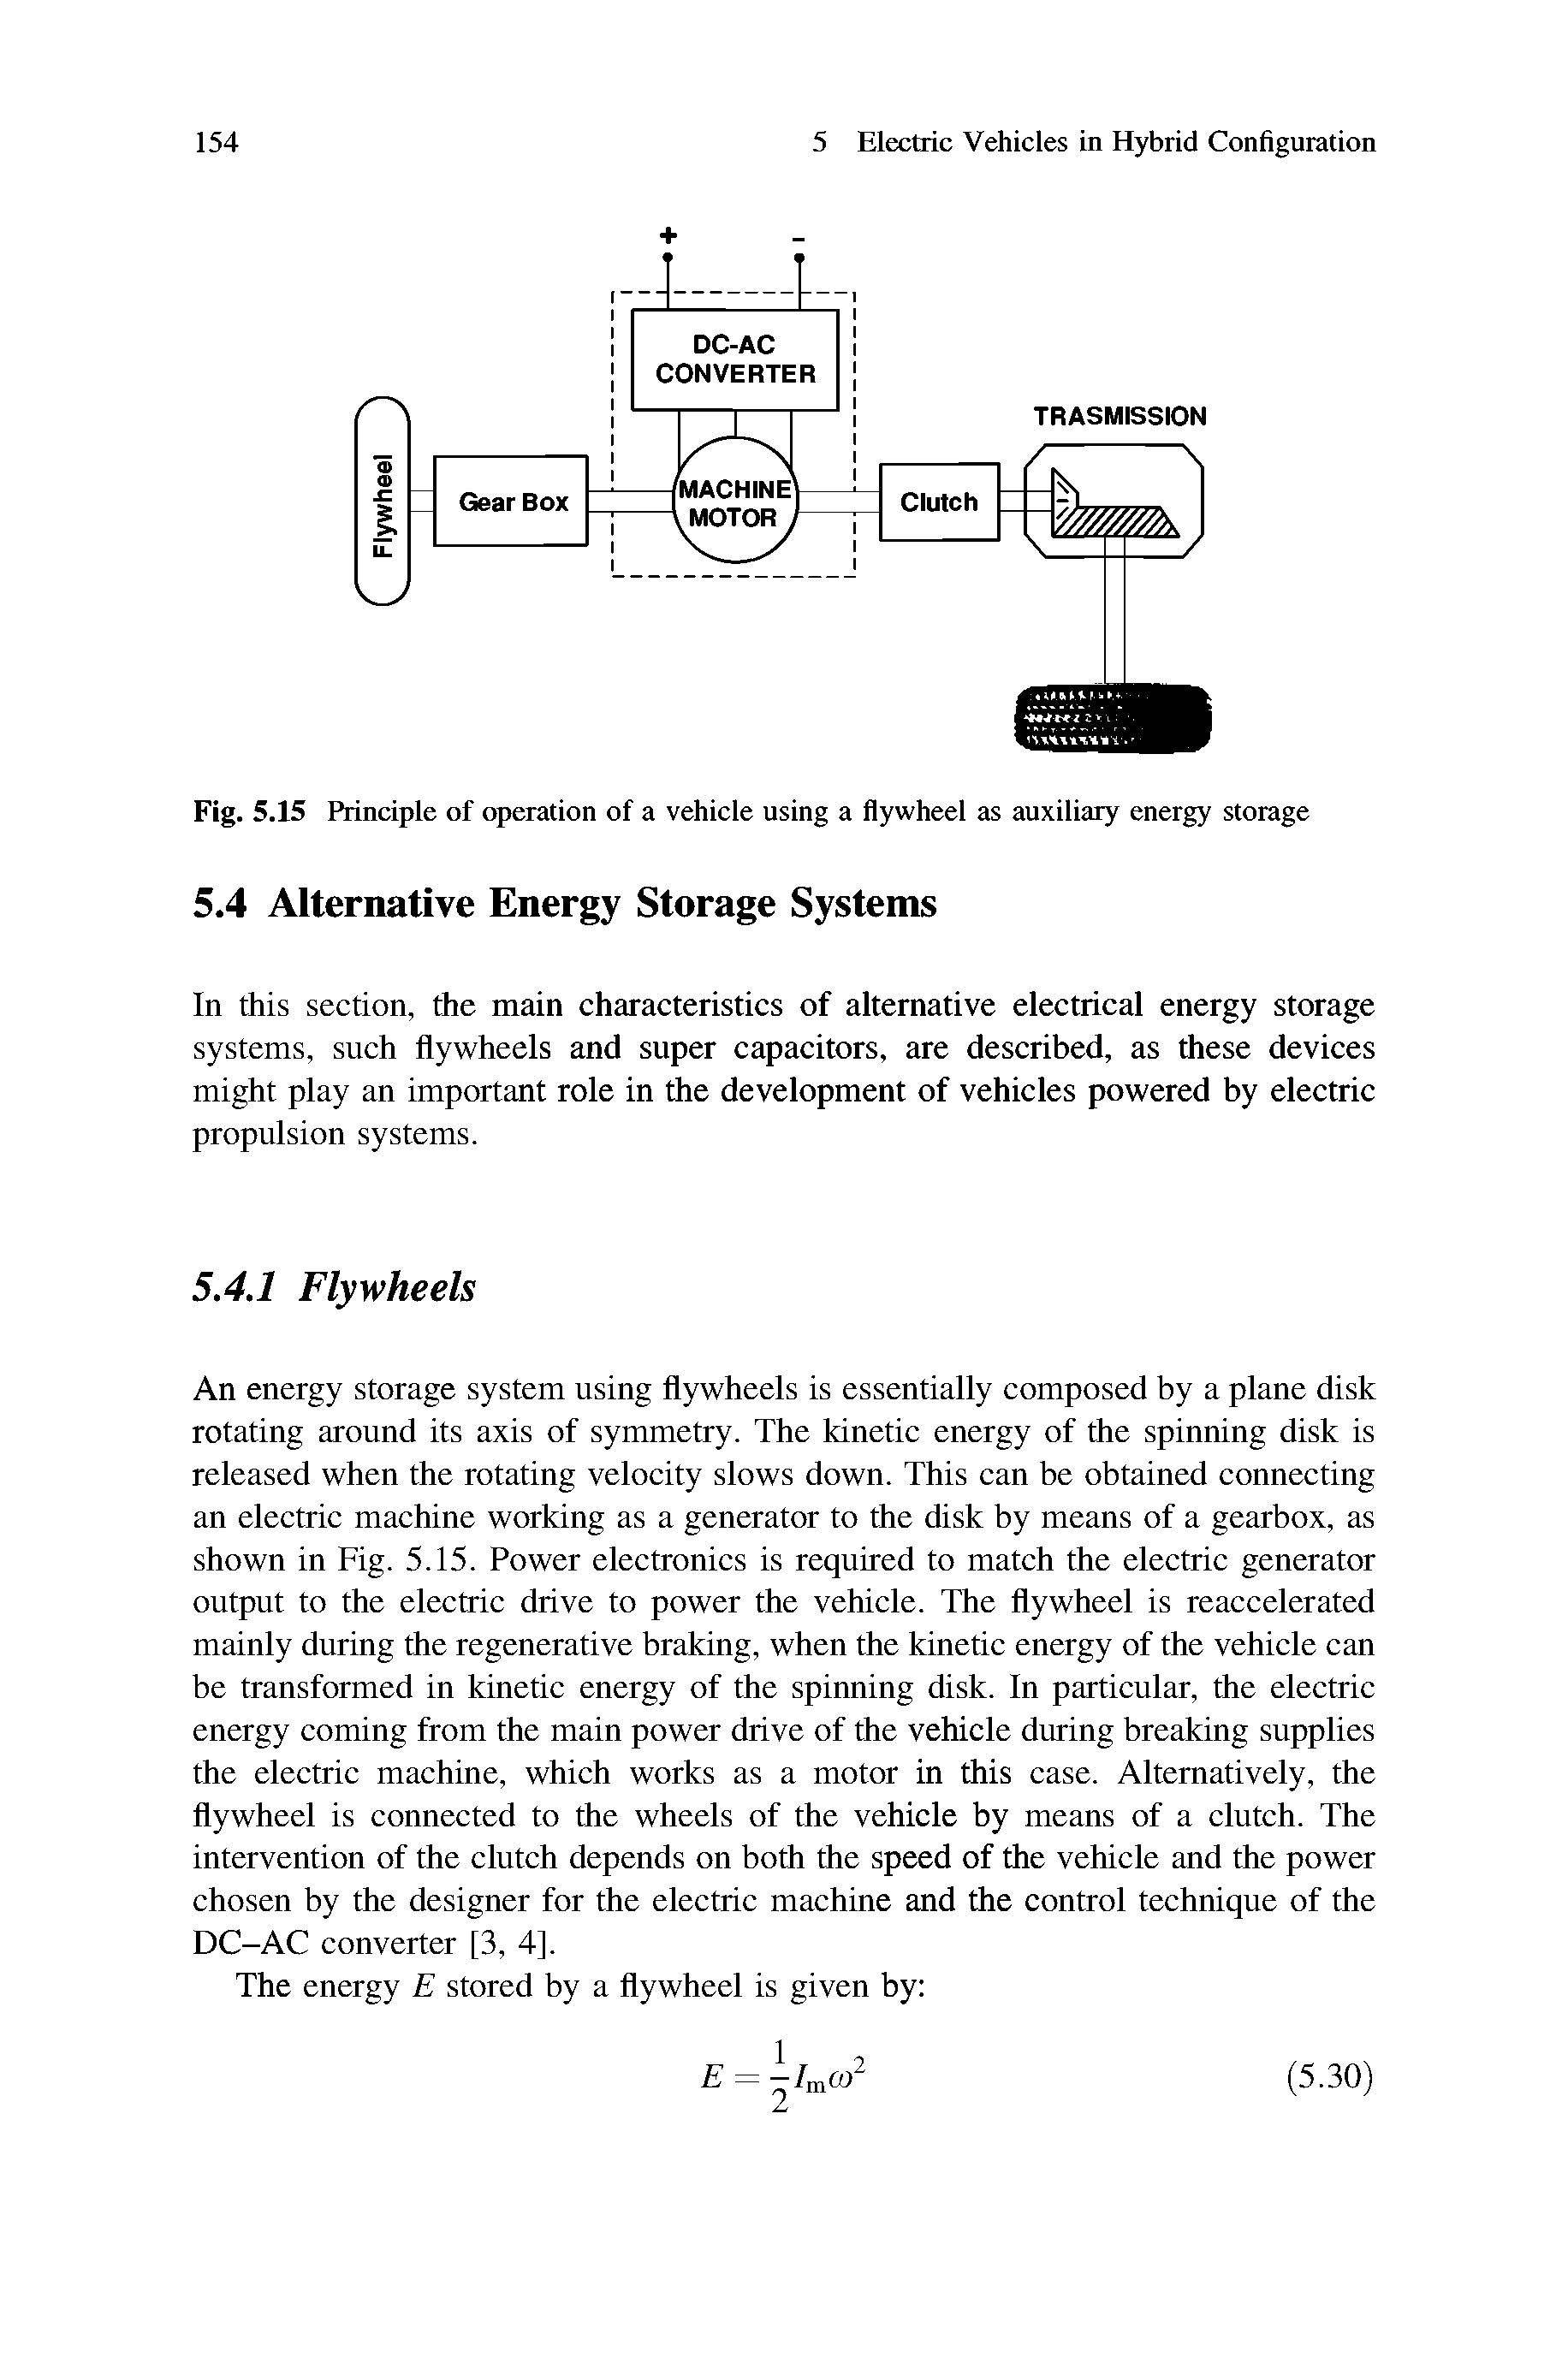 Fig. 5.15 Principle of operation of a vehicle using a flywheel as auxiliary energy storage...